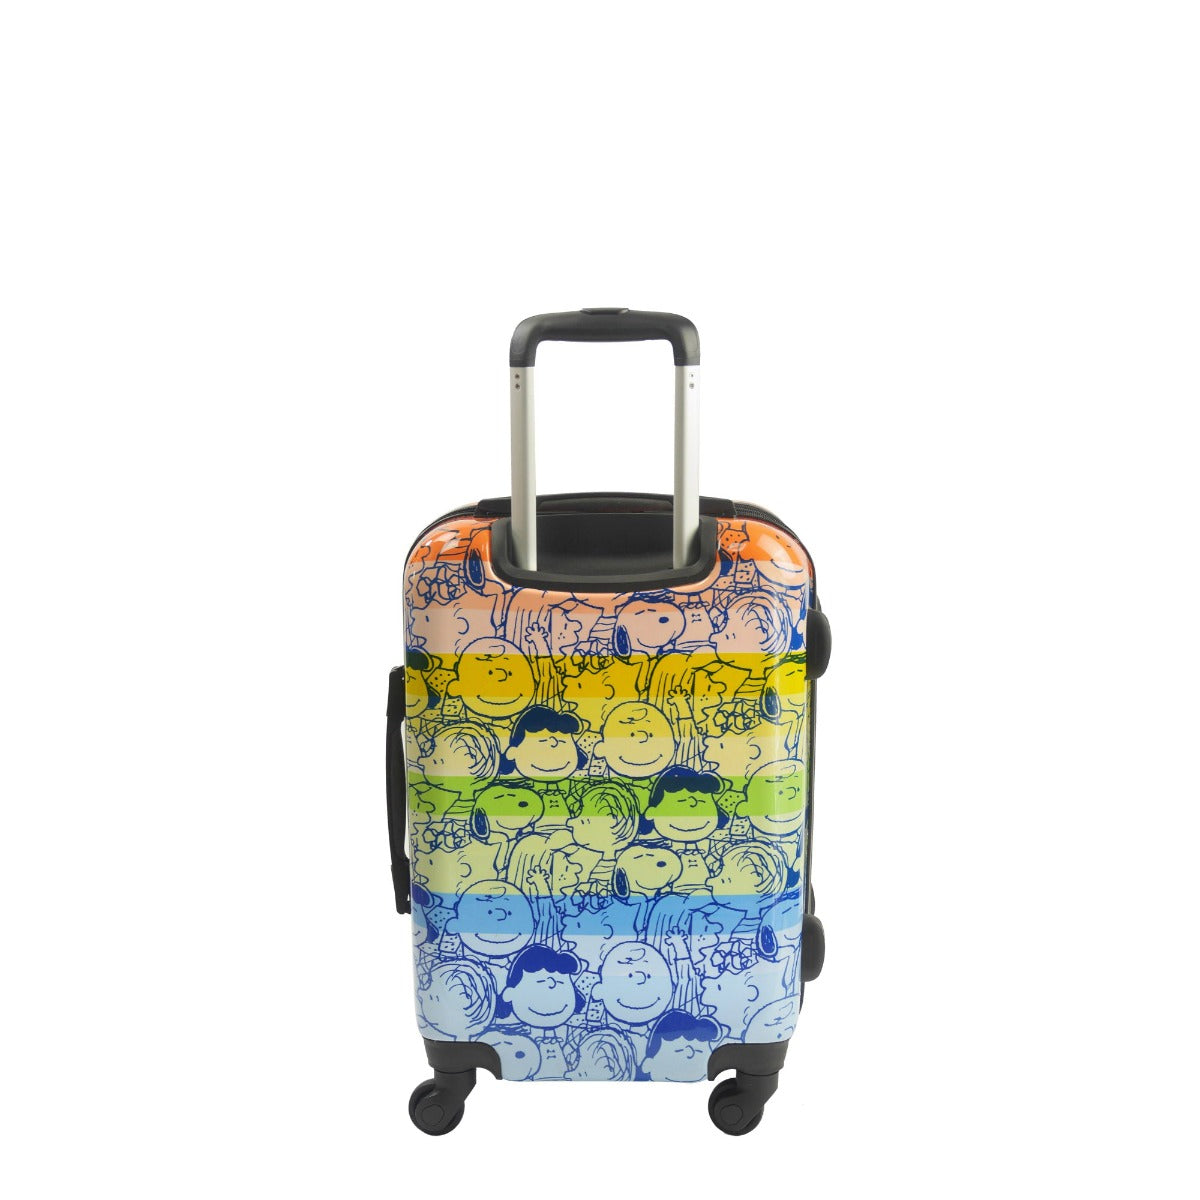 Peanuts rainbow 21" luggage hardside spinner suitcase - best carry on suitcases for travel